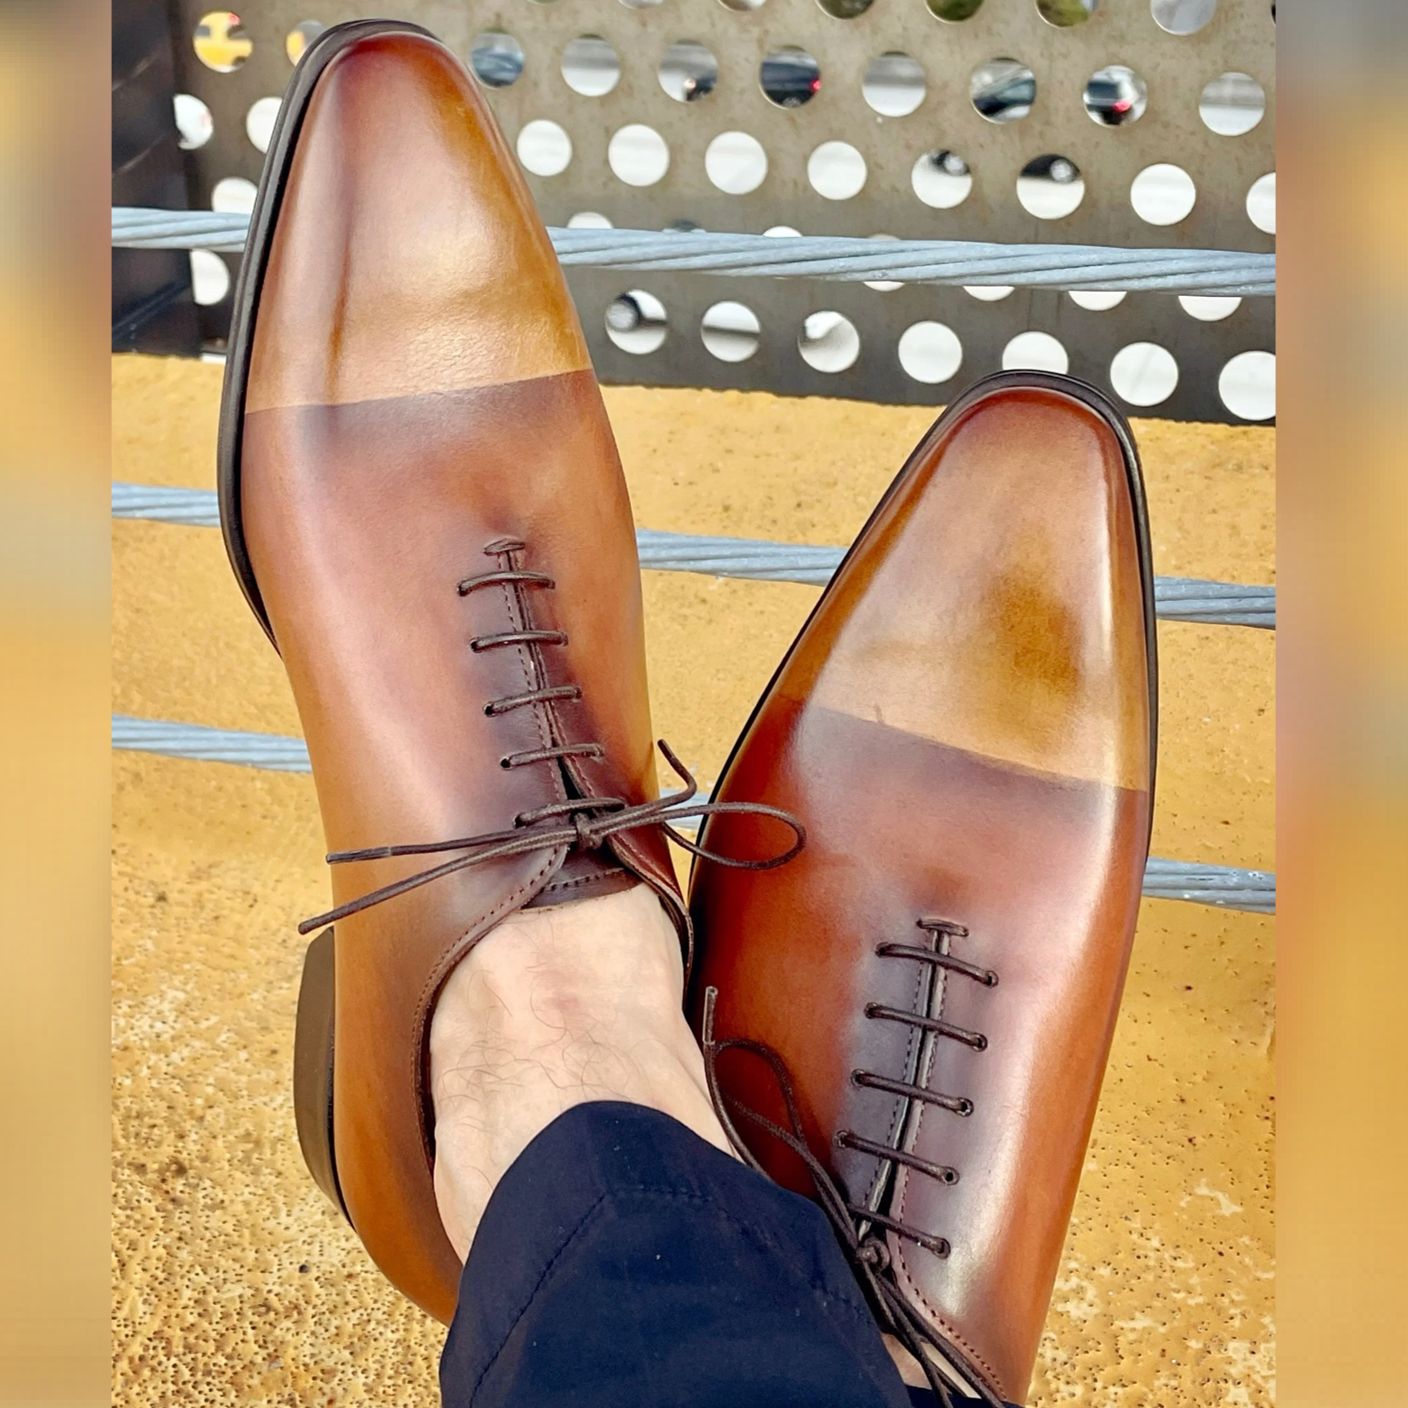 Mastrich Wholecut Derby Lace Up in Mostarda Tan by Jose Real